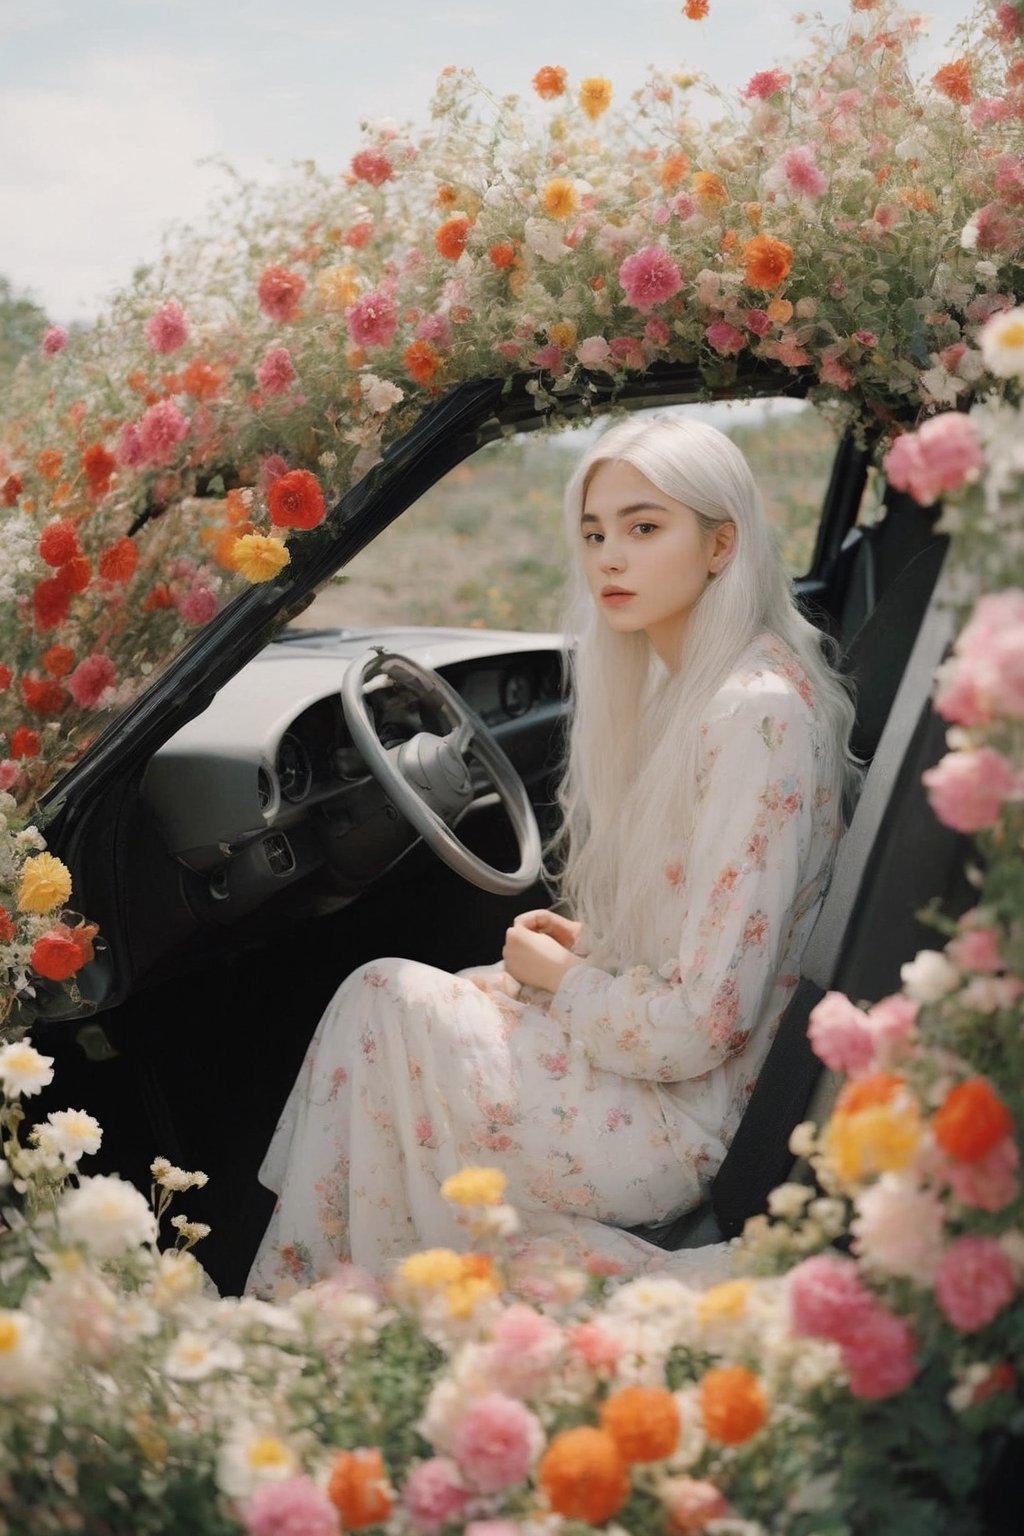 a Persian girl with white hair sitting in car filled withflowers, art by Rinko Kawauchi, in the style ofnaturalistic poses, vacation dadcore, youthfulenergy, a coolexpression, body extensions, flowersin the sky, analog film, super detail, dreamy lofiphotography, colourful, covered in flowers andvines, Inside view,FlowerStyle,r,hhc,interior,real_booster